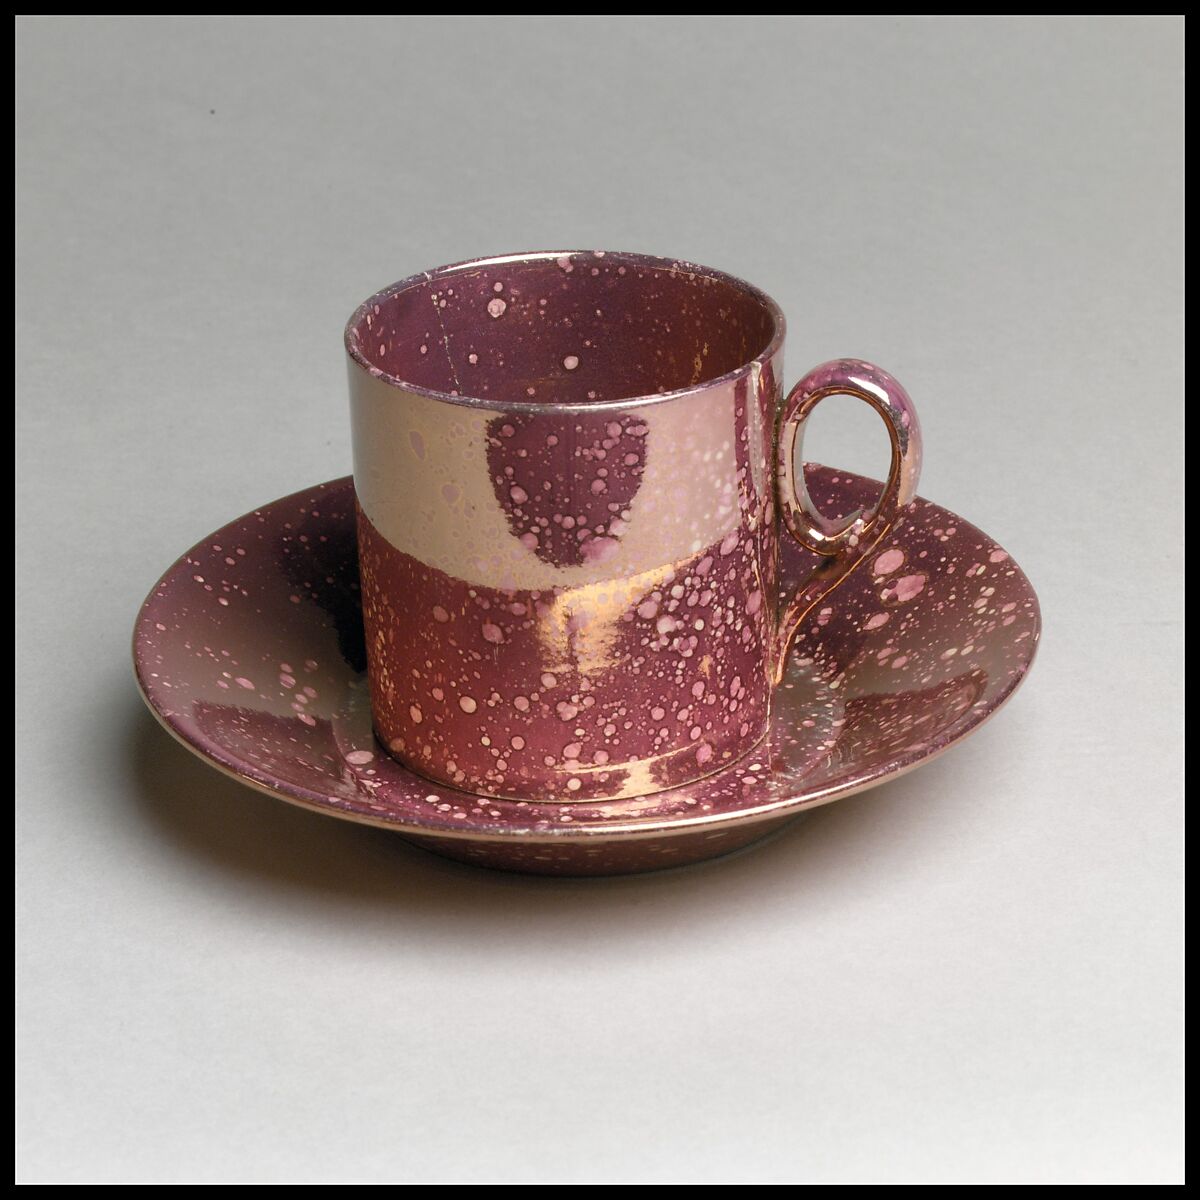 Coffee cup (part of a set), Lustreware, French, Sarreguemines 